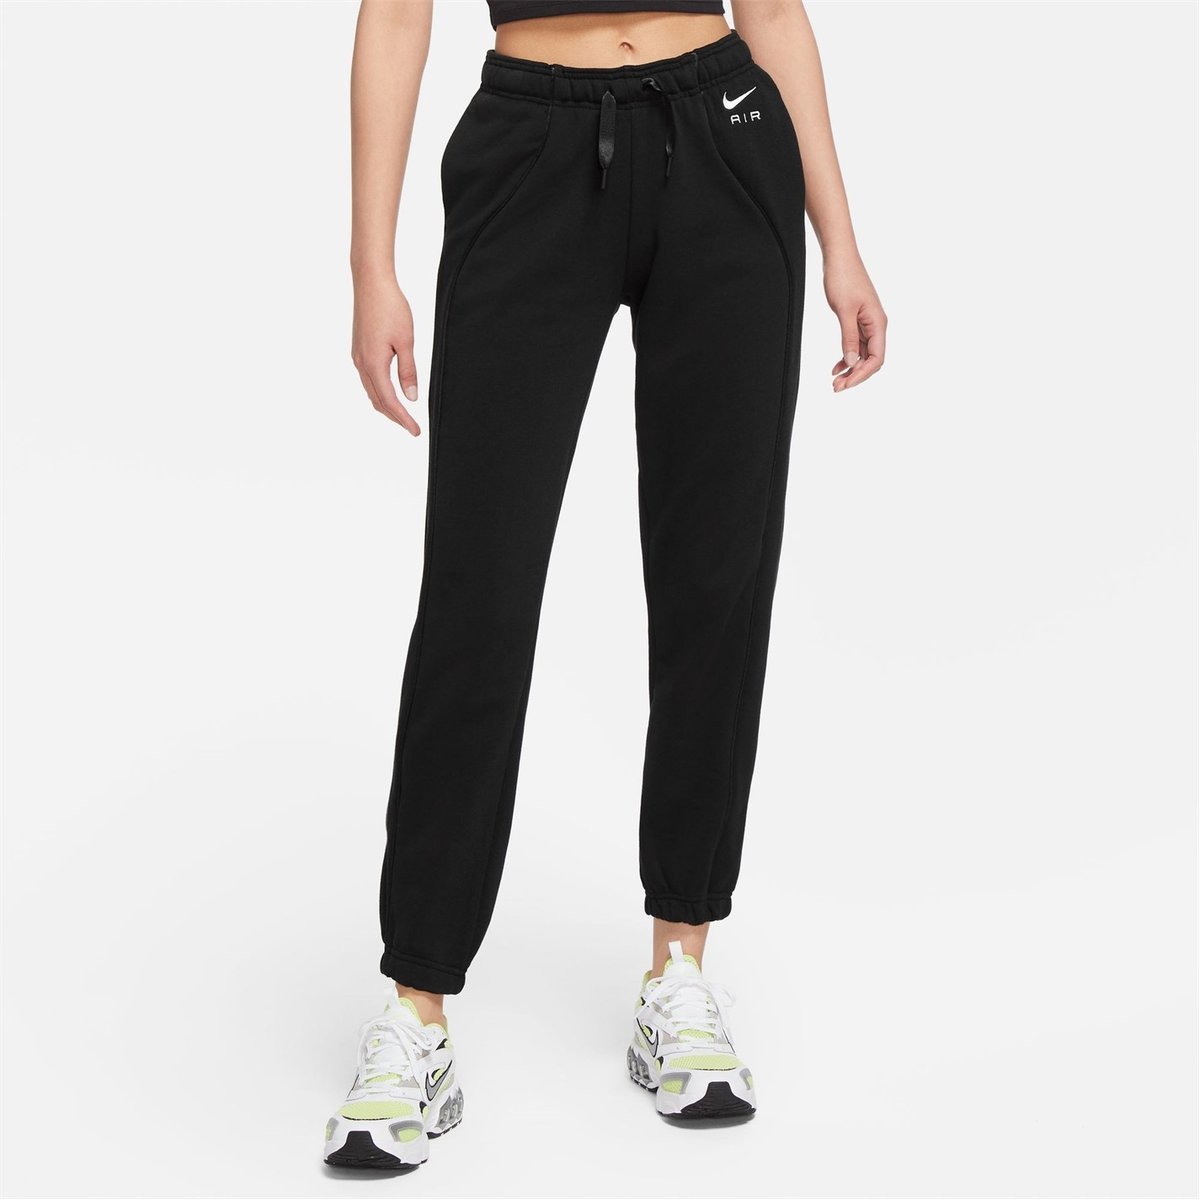 UNDER ARMOUR Womens Medium Cropped 3/4 Joggers Pants Heather Black Running  Gym